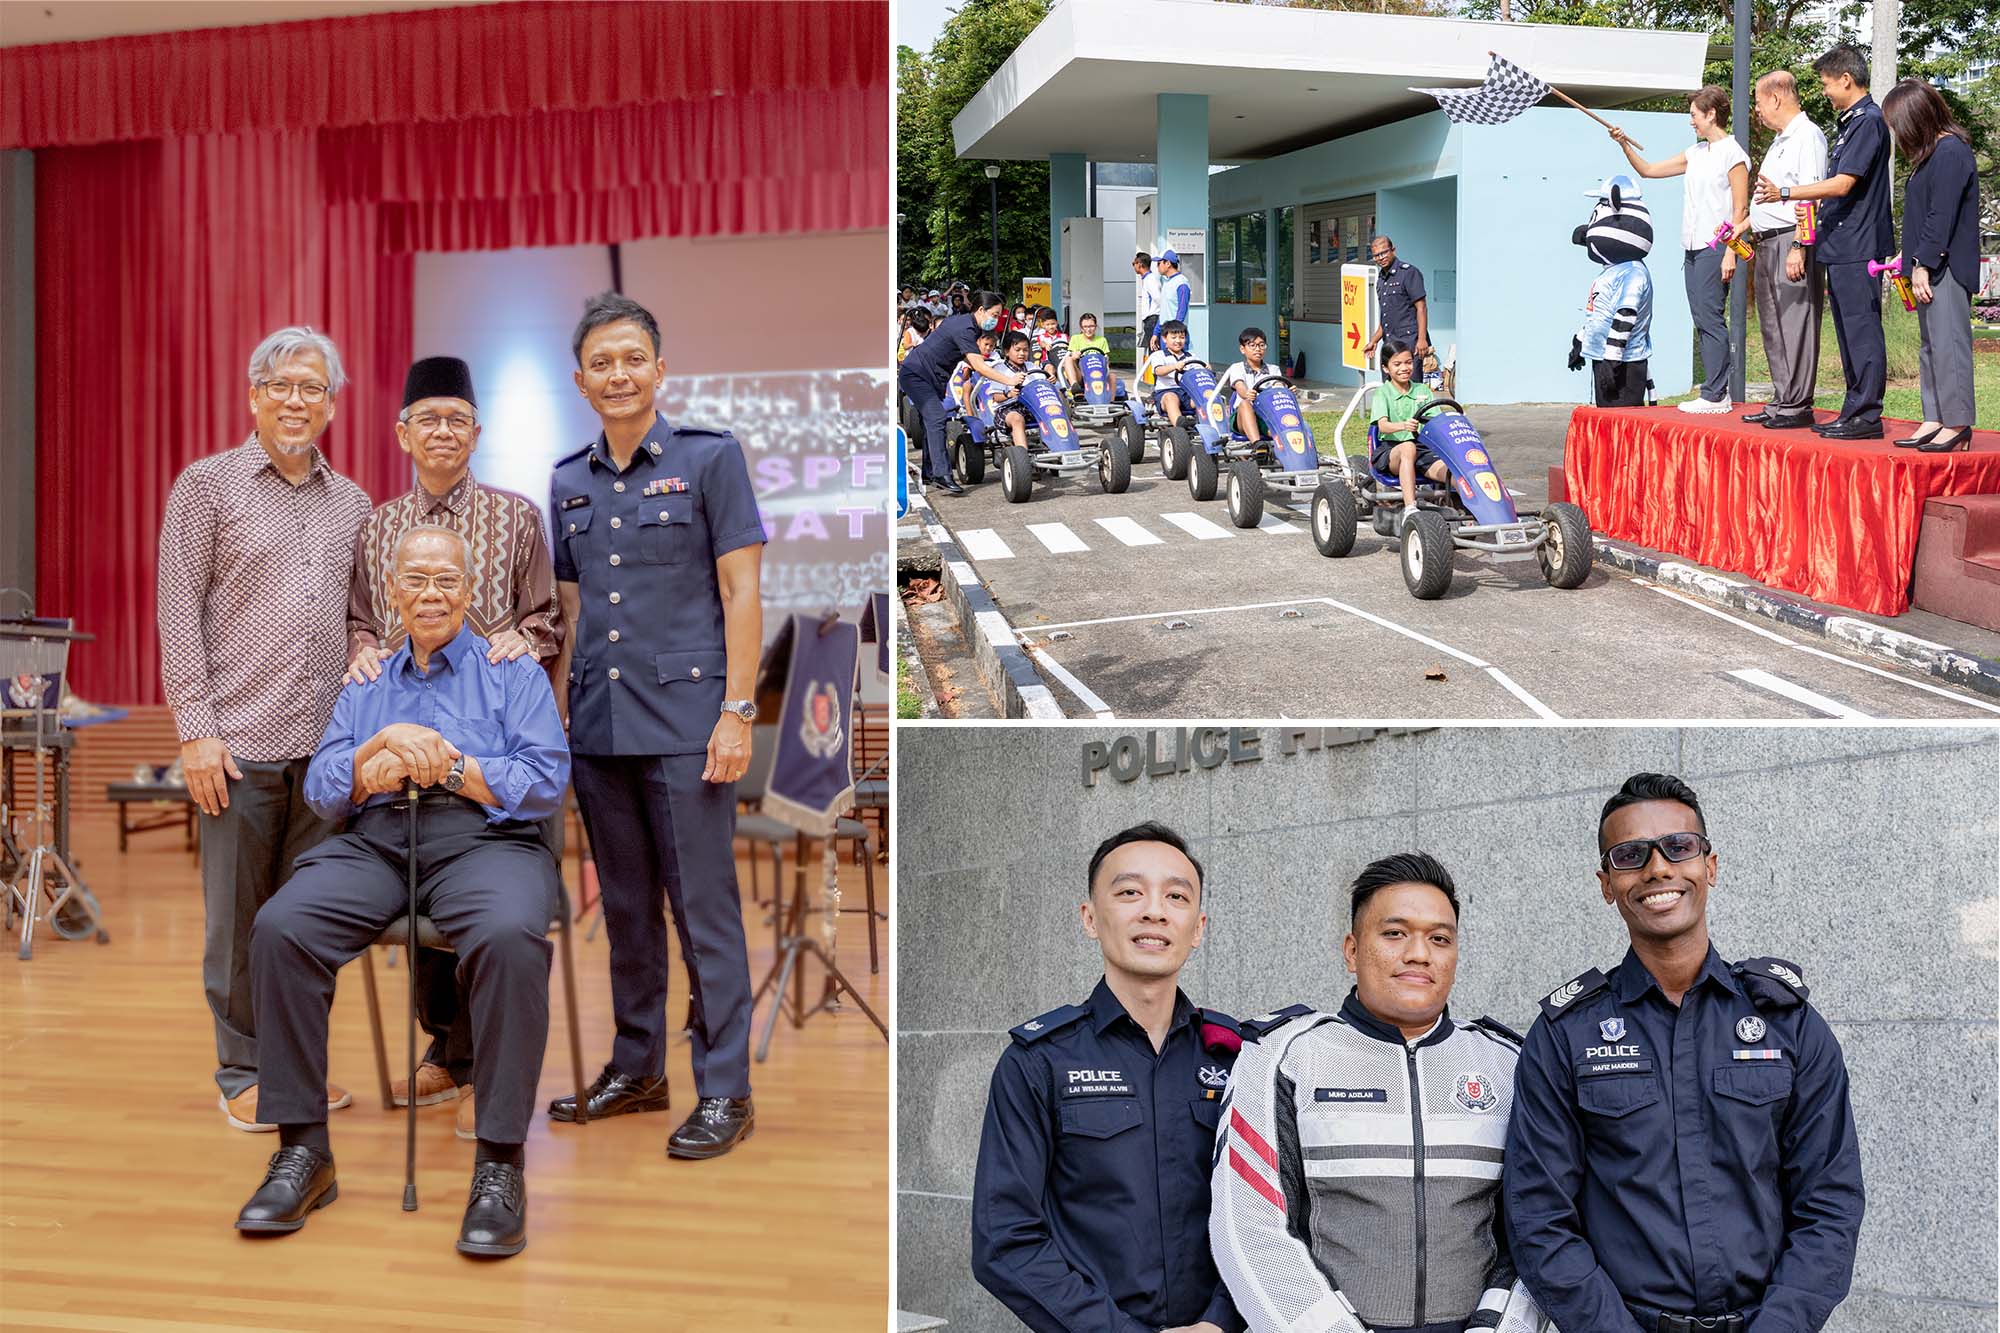 A compilation of Amanda Wong's favourite photos from her assignments. There are three photos in the collage. The photo on the left depicts her meeting past and current members of the SPF Band. The top-right photo depicts an event at the Singapore Traffic Games. The bottom-right photo depicts three officers who worked together to apprehend a drunk-driving suspect.